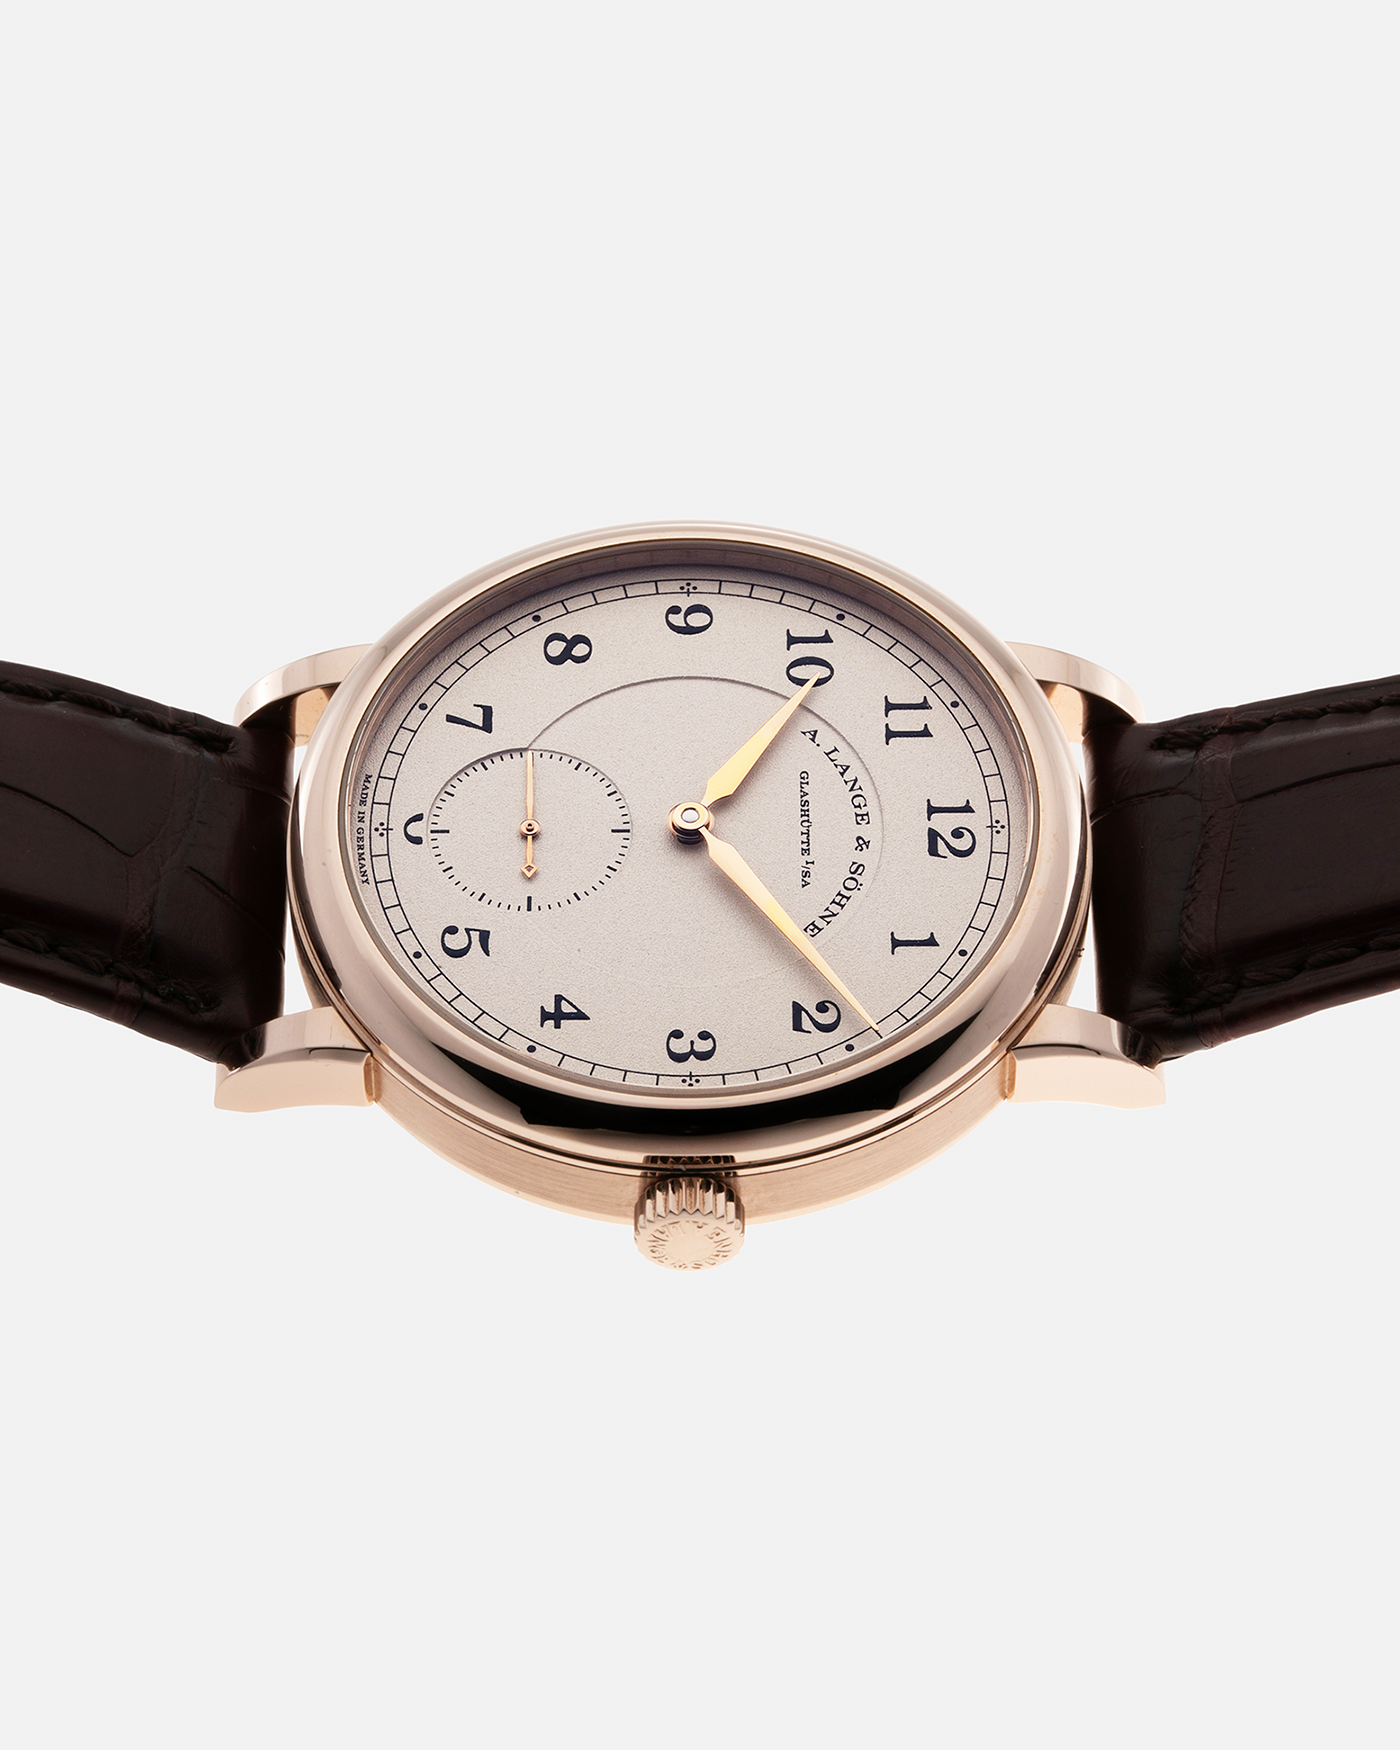 Brand: A. Lange & Söhne Year: 2015 Model: 1815 200th Anniversary F. A. Lange, Limited Edition of 200 pieces Ref Number: 236.050 Material: Honey Gold Movement: A. Lange & Söhne Cal. L051.1, Manual-Winding Case Diameter: 40mm Strap: A. Lange & Söhne Brown Alligator with Signed Honey Gold Tang Buckle